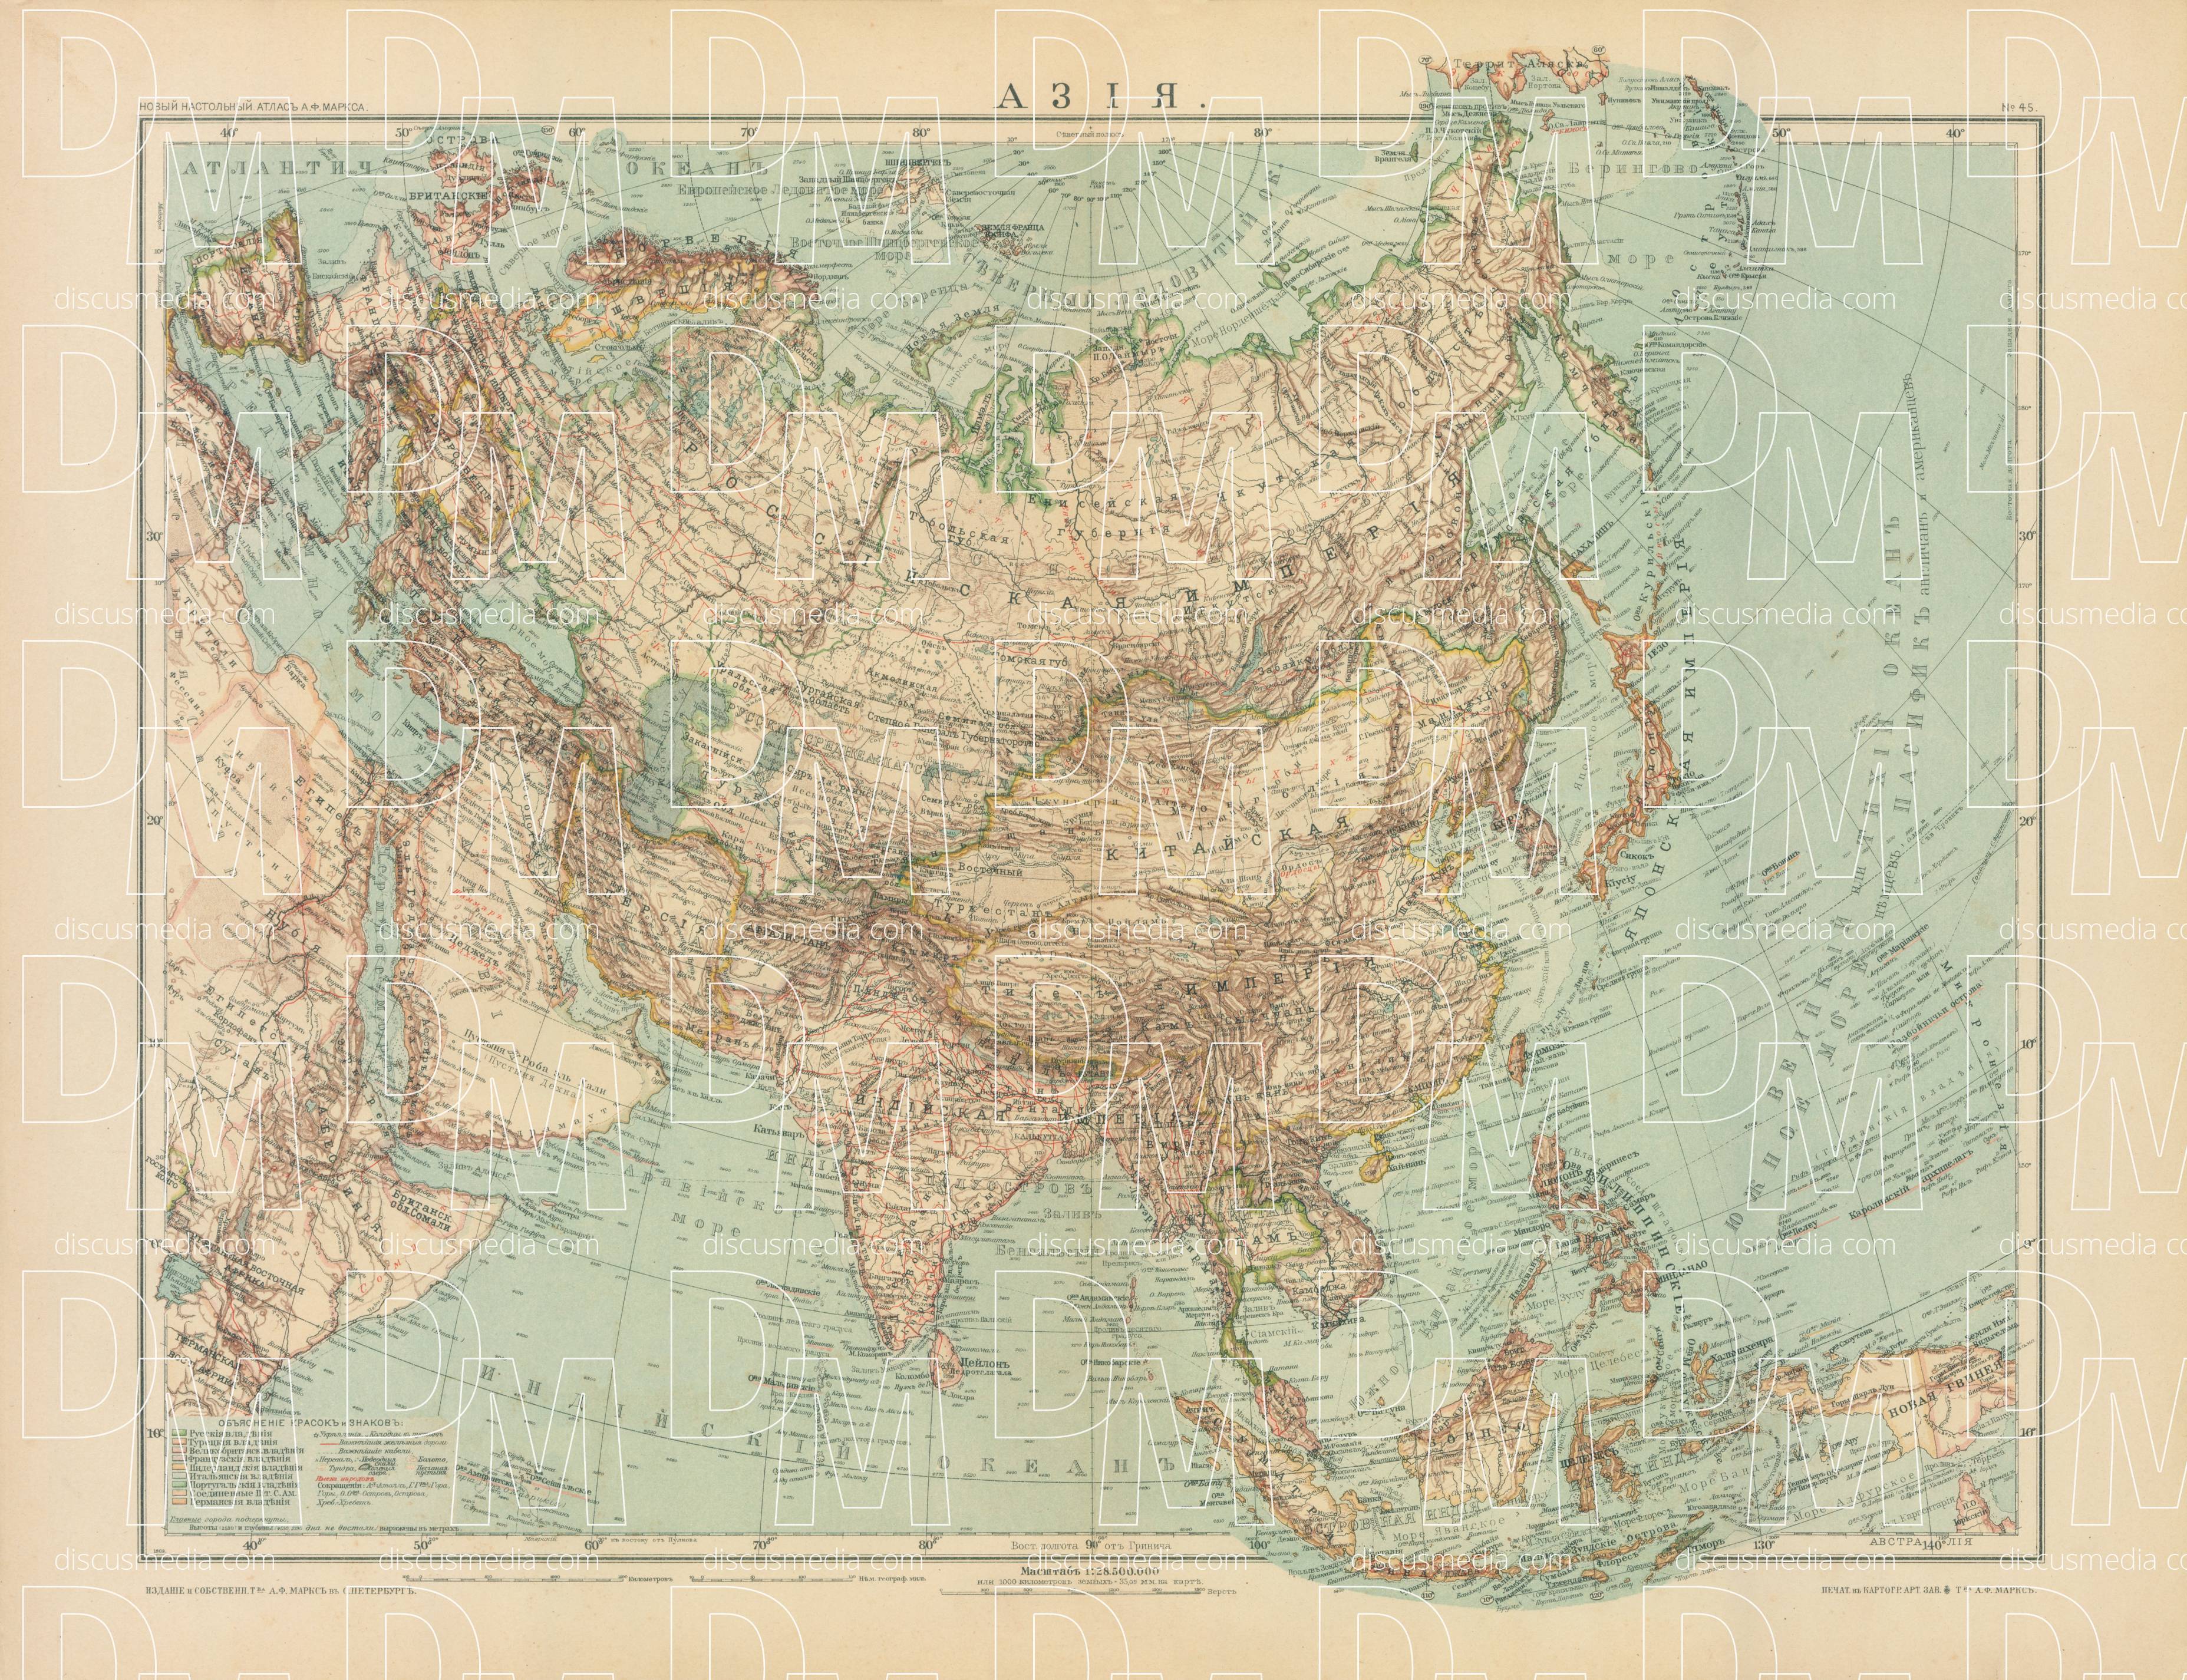 Old map of Asia in 1910. Buy vintage map replica poster print or ...